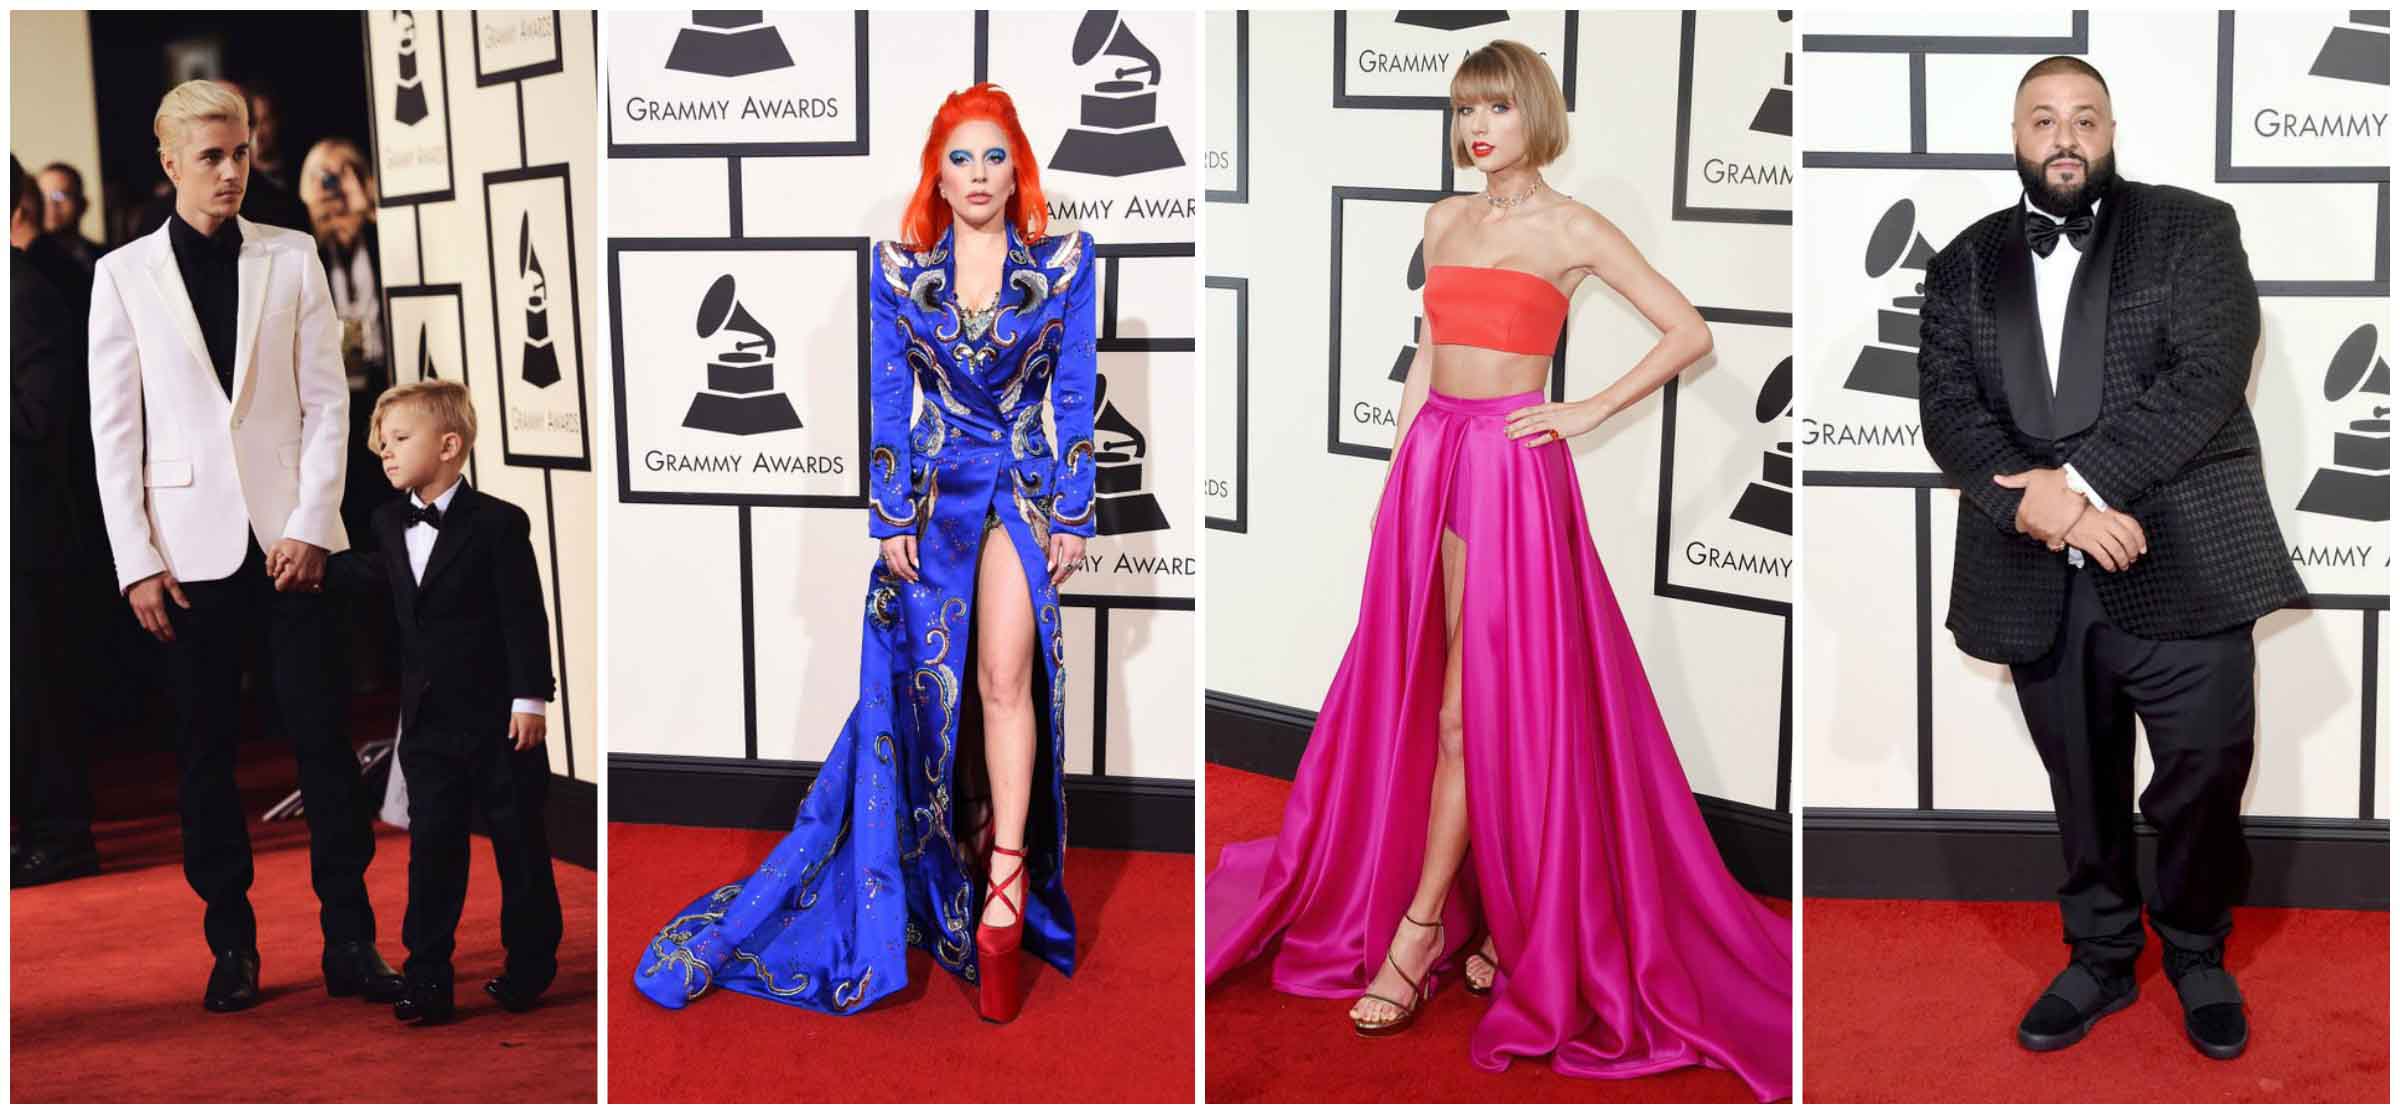 Grammys 2016 outfits